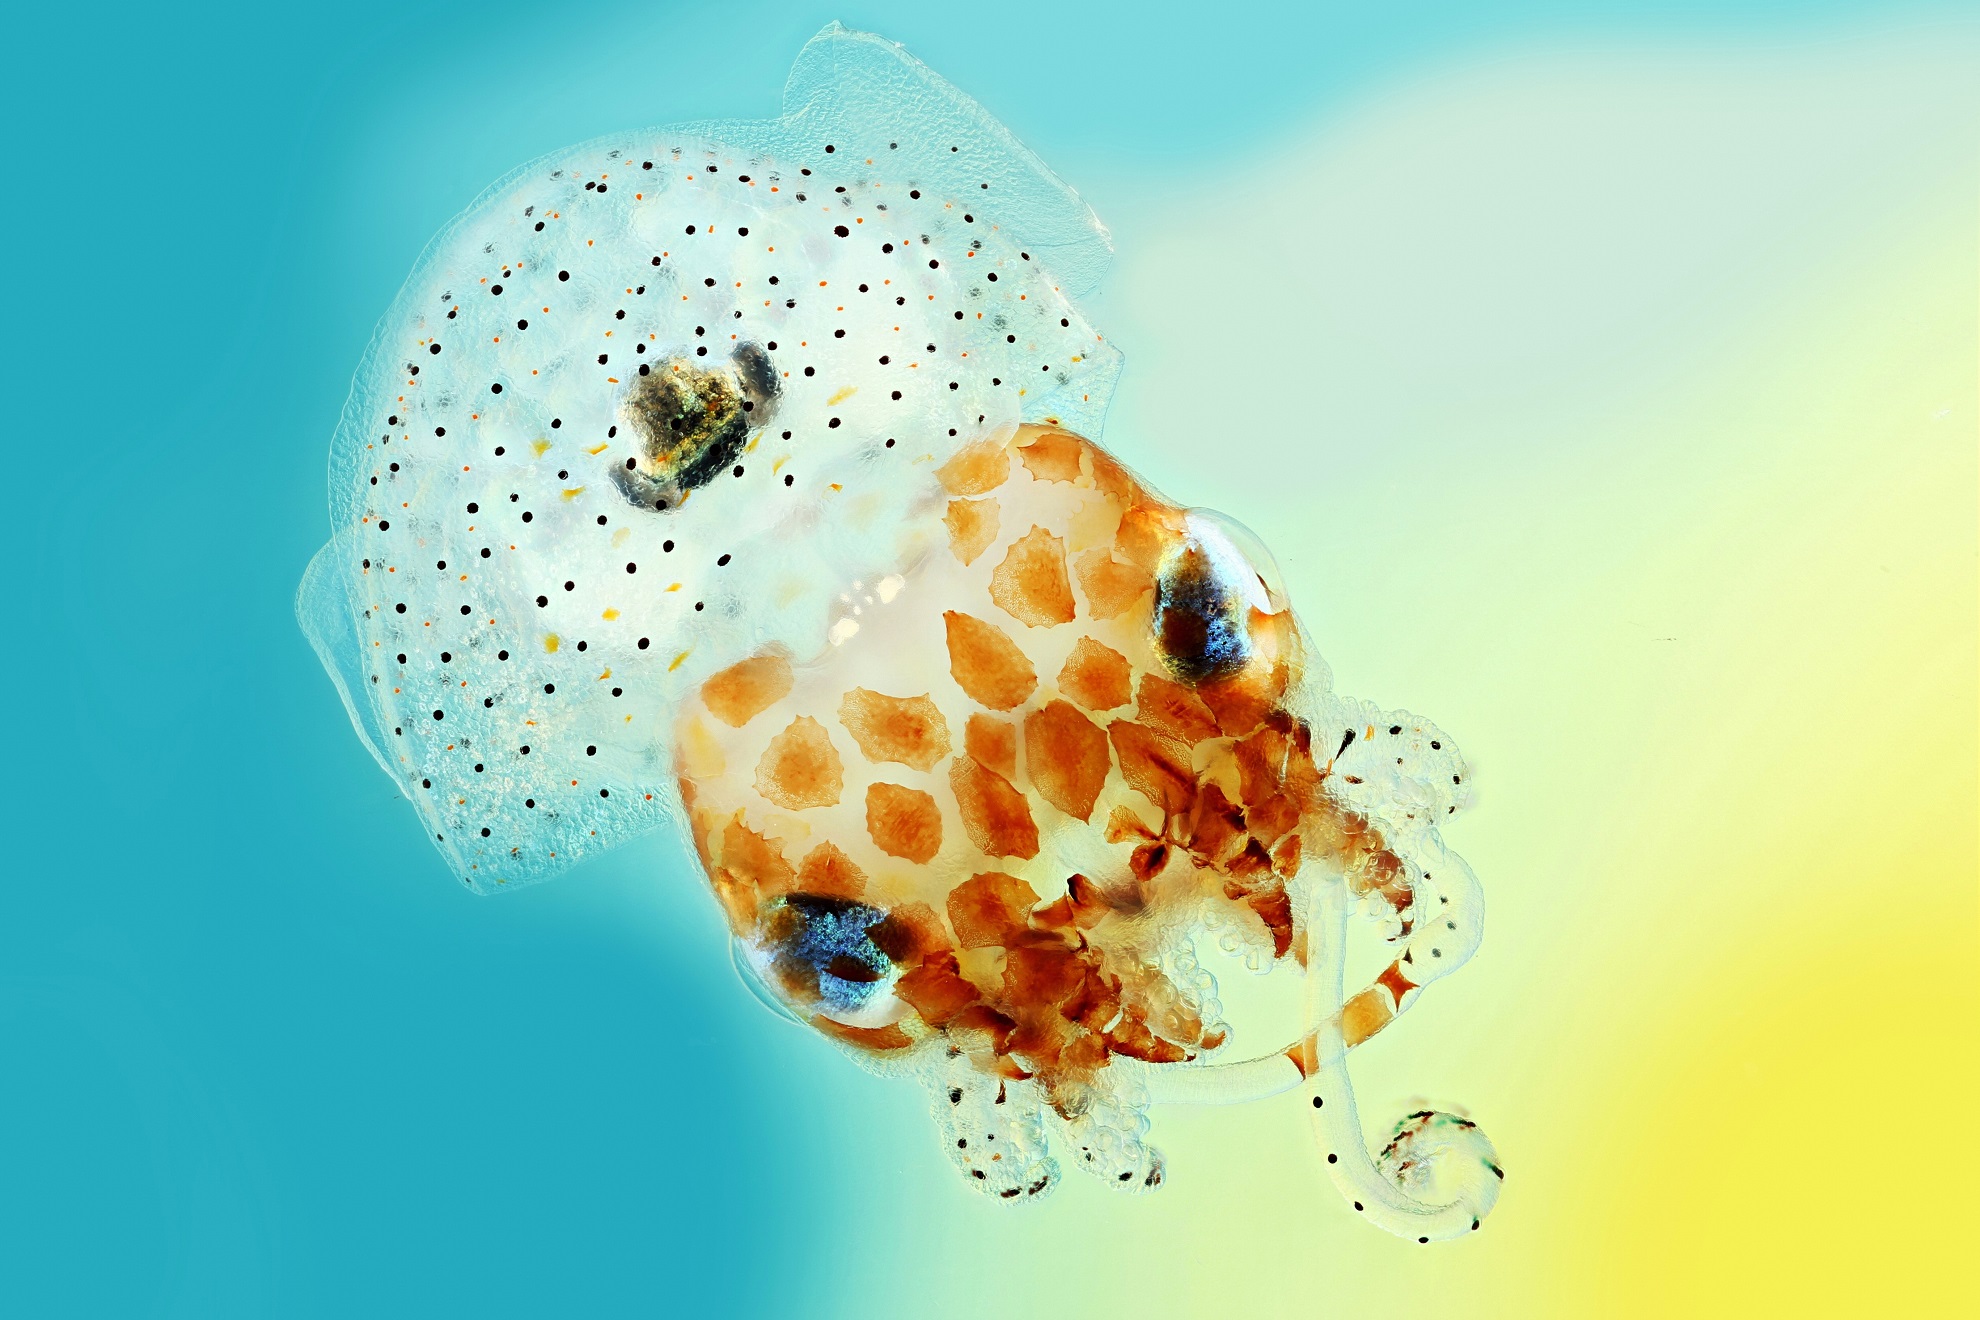 Native to the Pacific Ocean, Hawaiian bobtail squid are nocturnal predators that remain buried under the sand during the day and come out to hunt for shrimp near coral reefs at night. The squid have a light organ on their underside that houses a colony of glowing bacteria called Vibrio fischeri. The squid provide food and shelter for these bacteria in return for their bioluminescence.